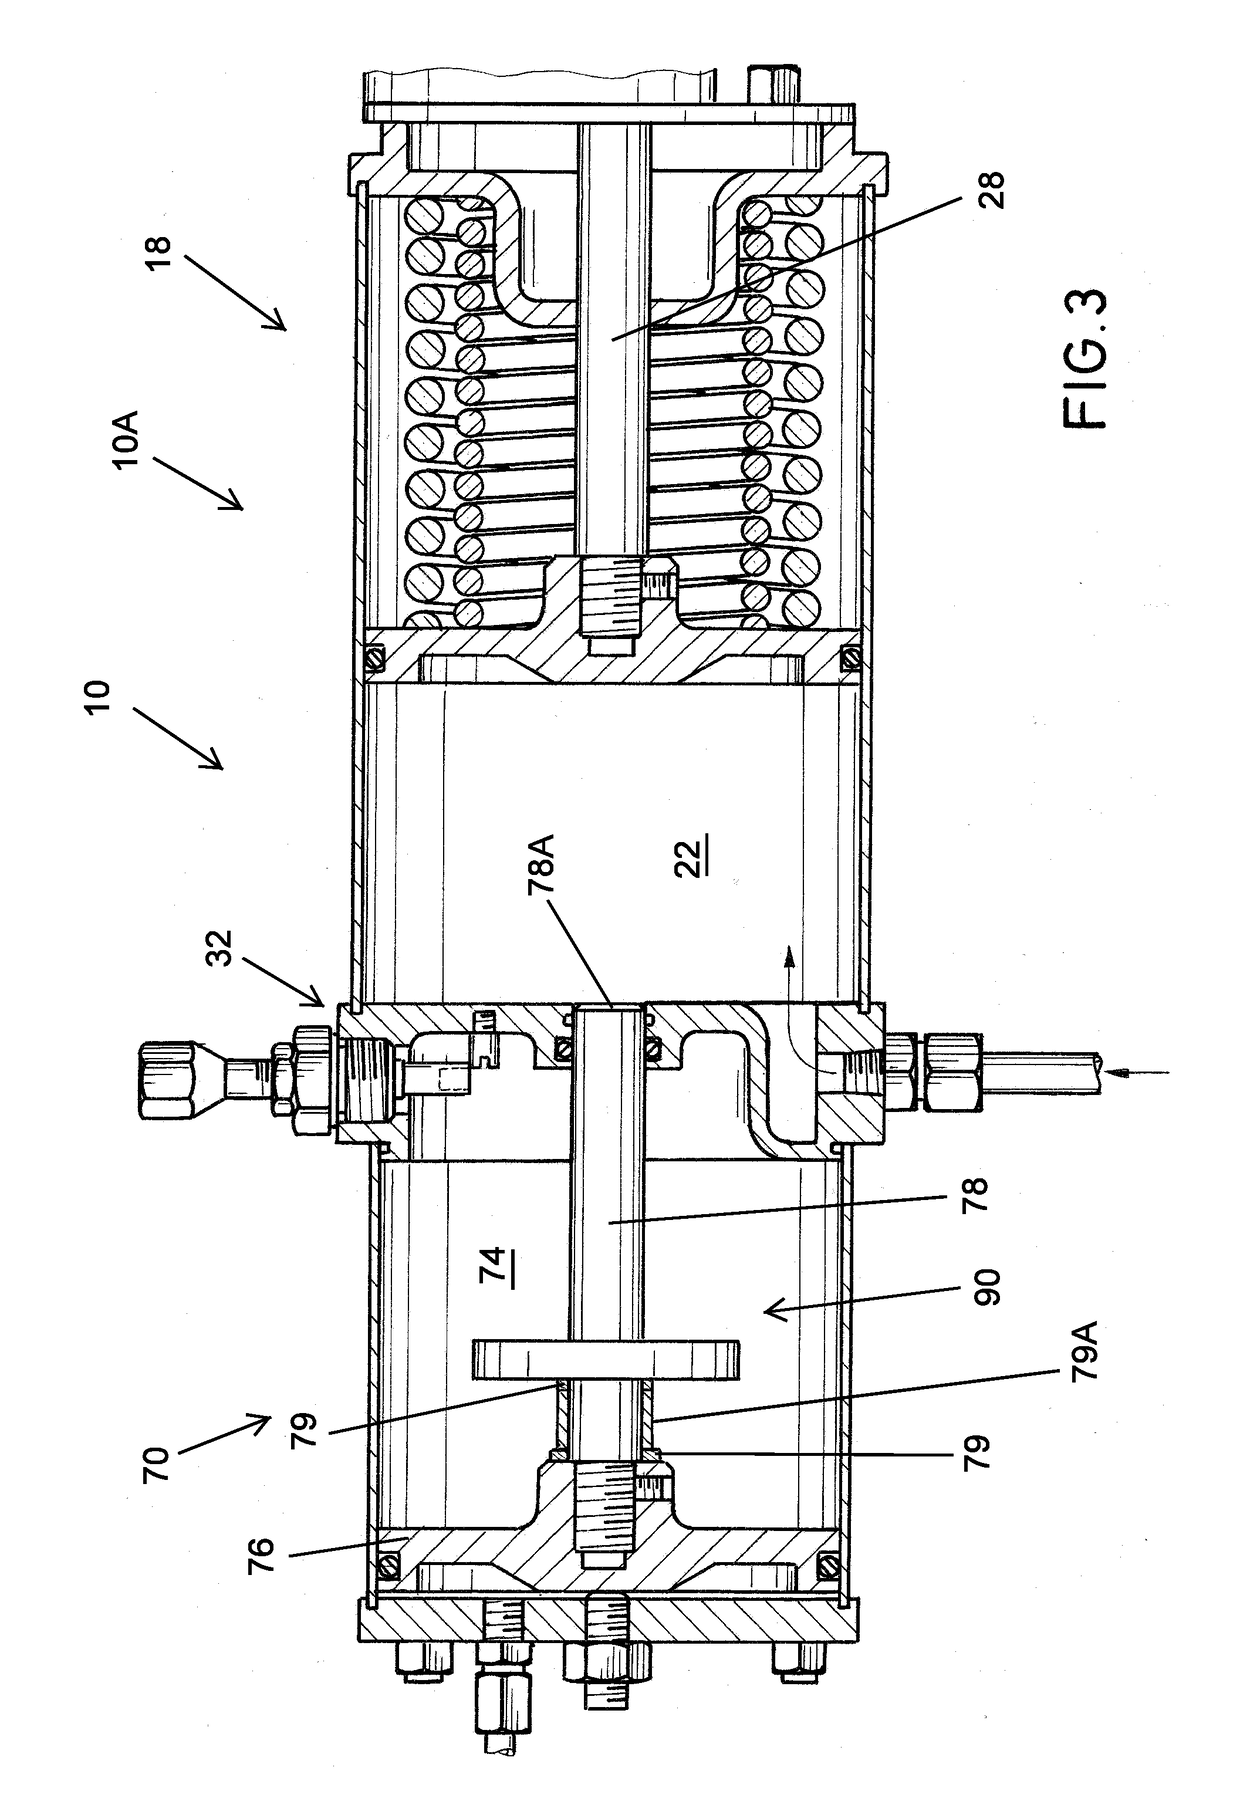 Actuator Assembly for Conducting Partial Stroke Testing